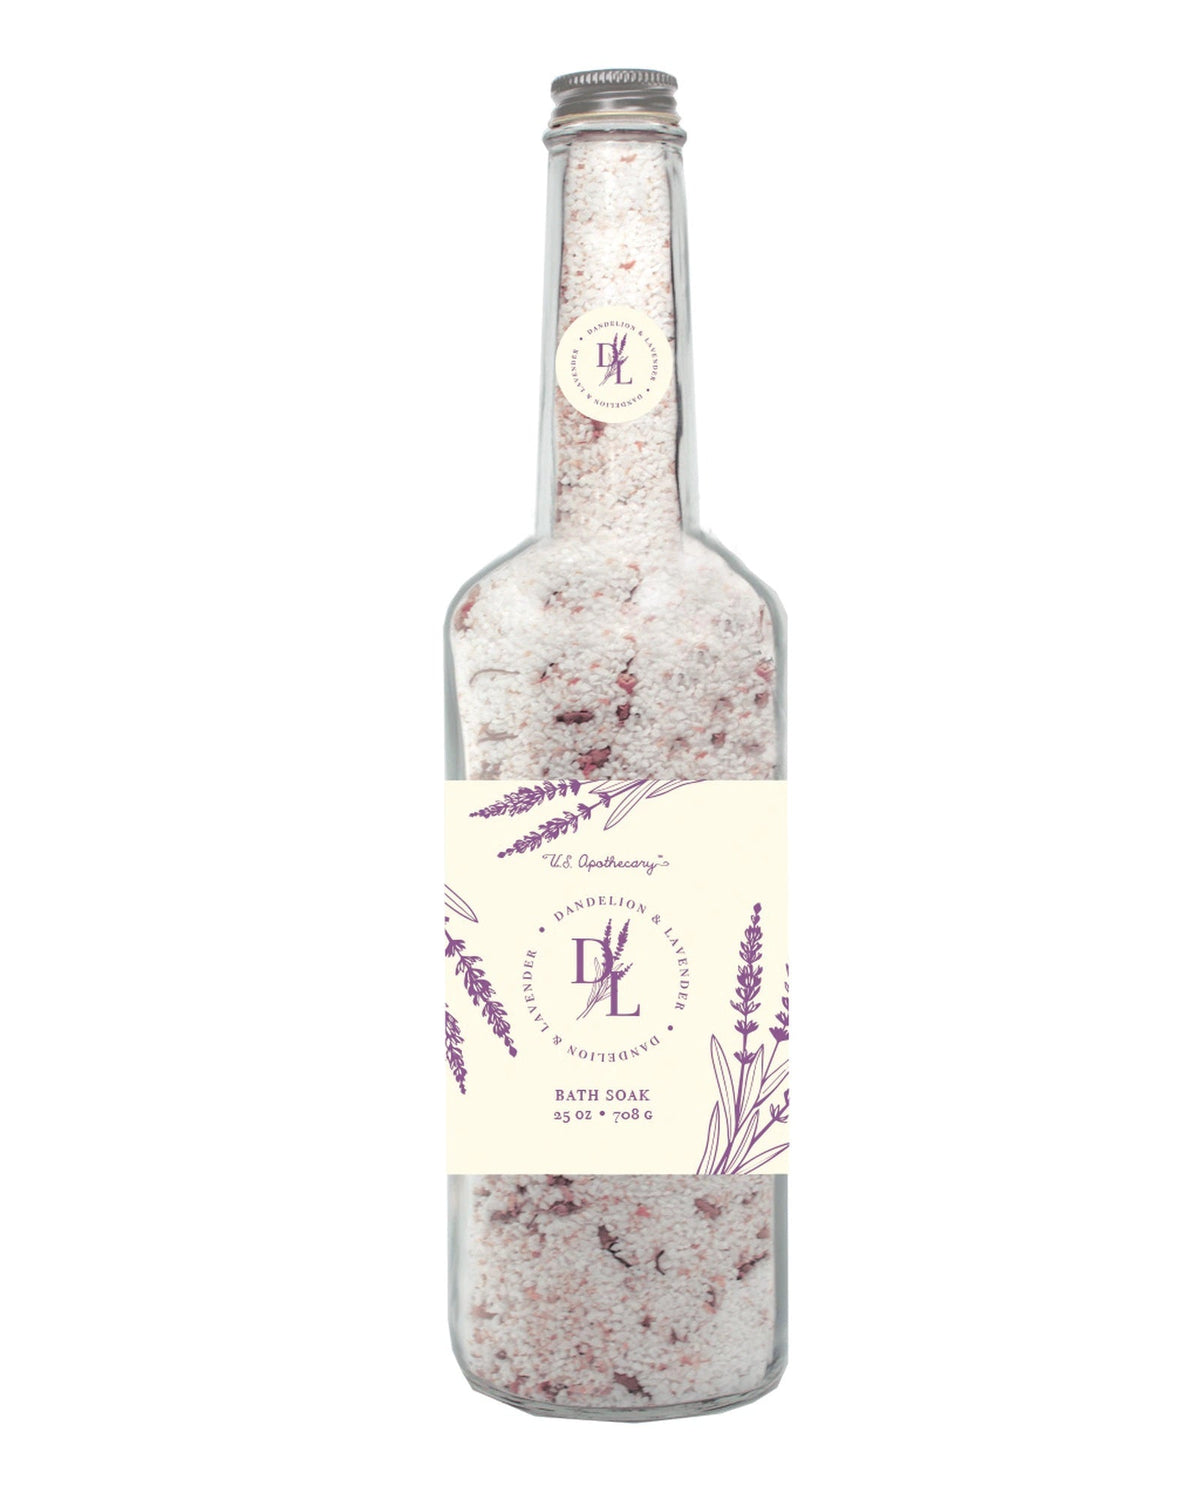 A clear, tall glass bottle containing U.S. Apothecary Dandelion & Lavender Bath Salt Soak, adorned with a cream label featuring lavender illustrations and elegant typography. The bottle cap has a small, round matching label.